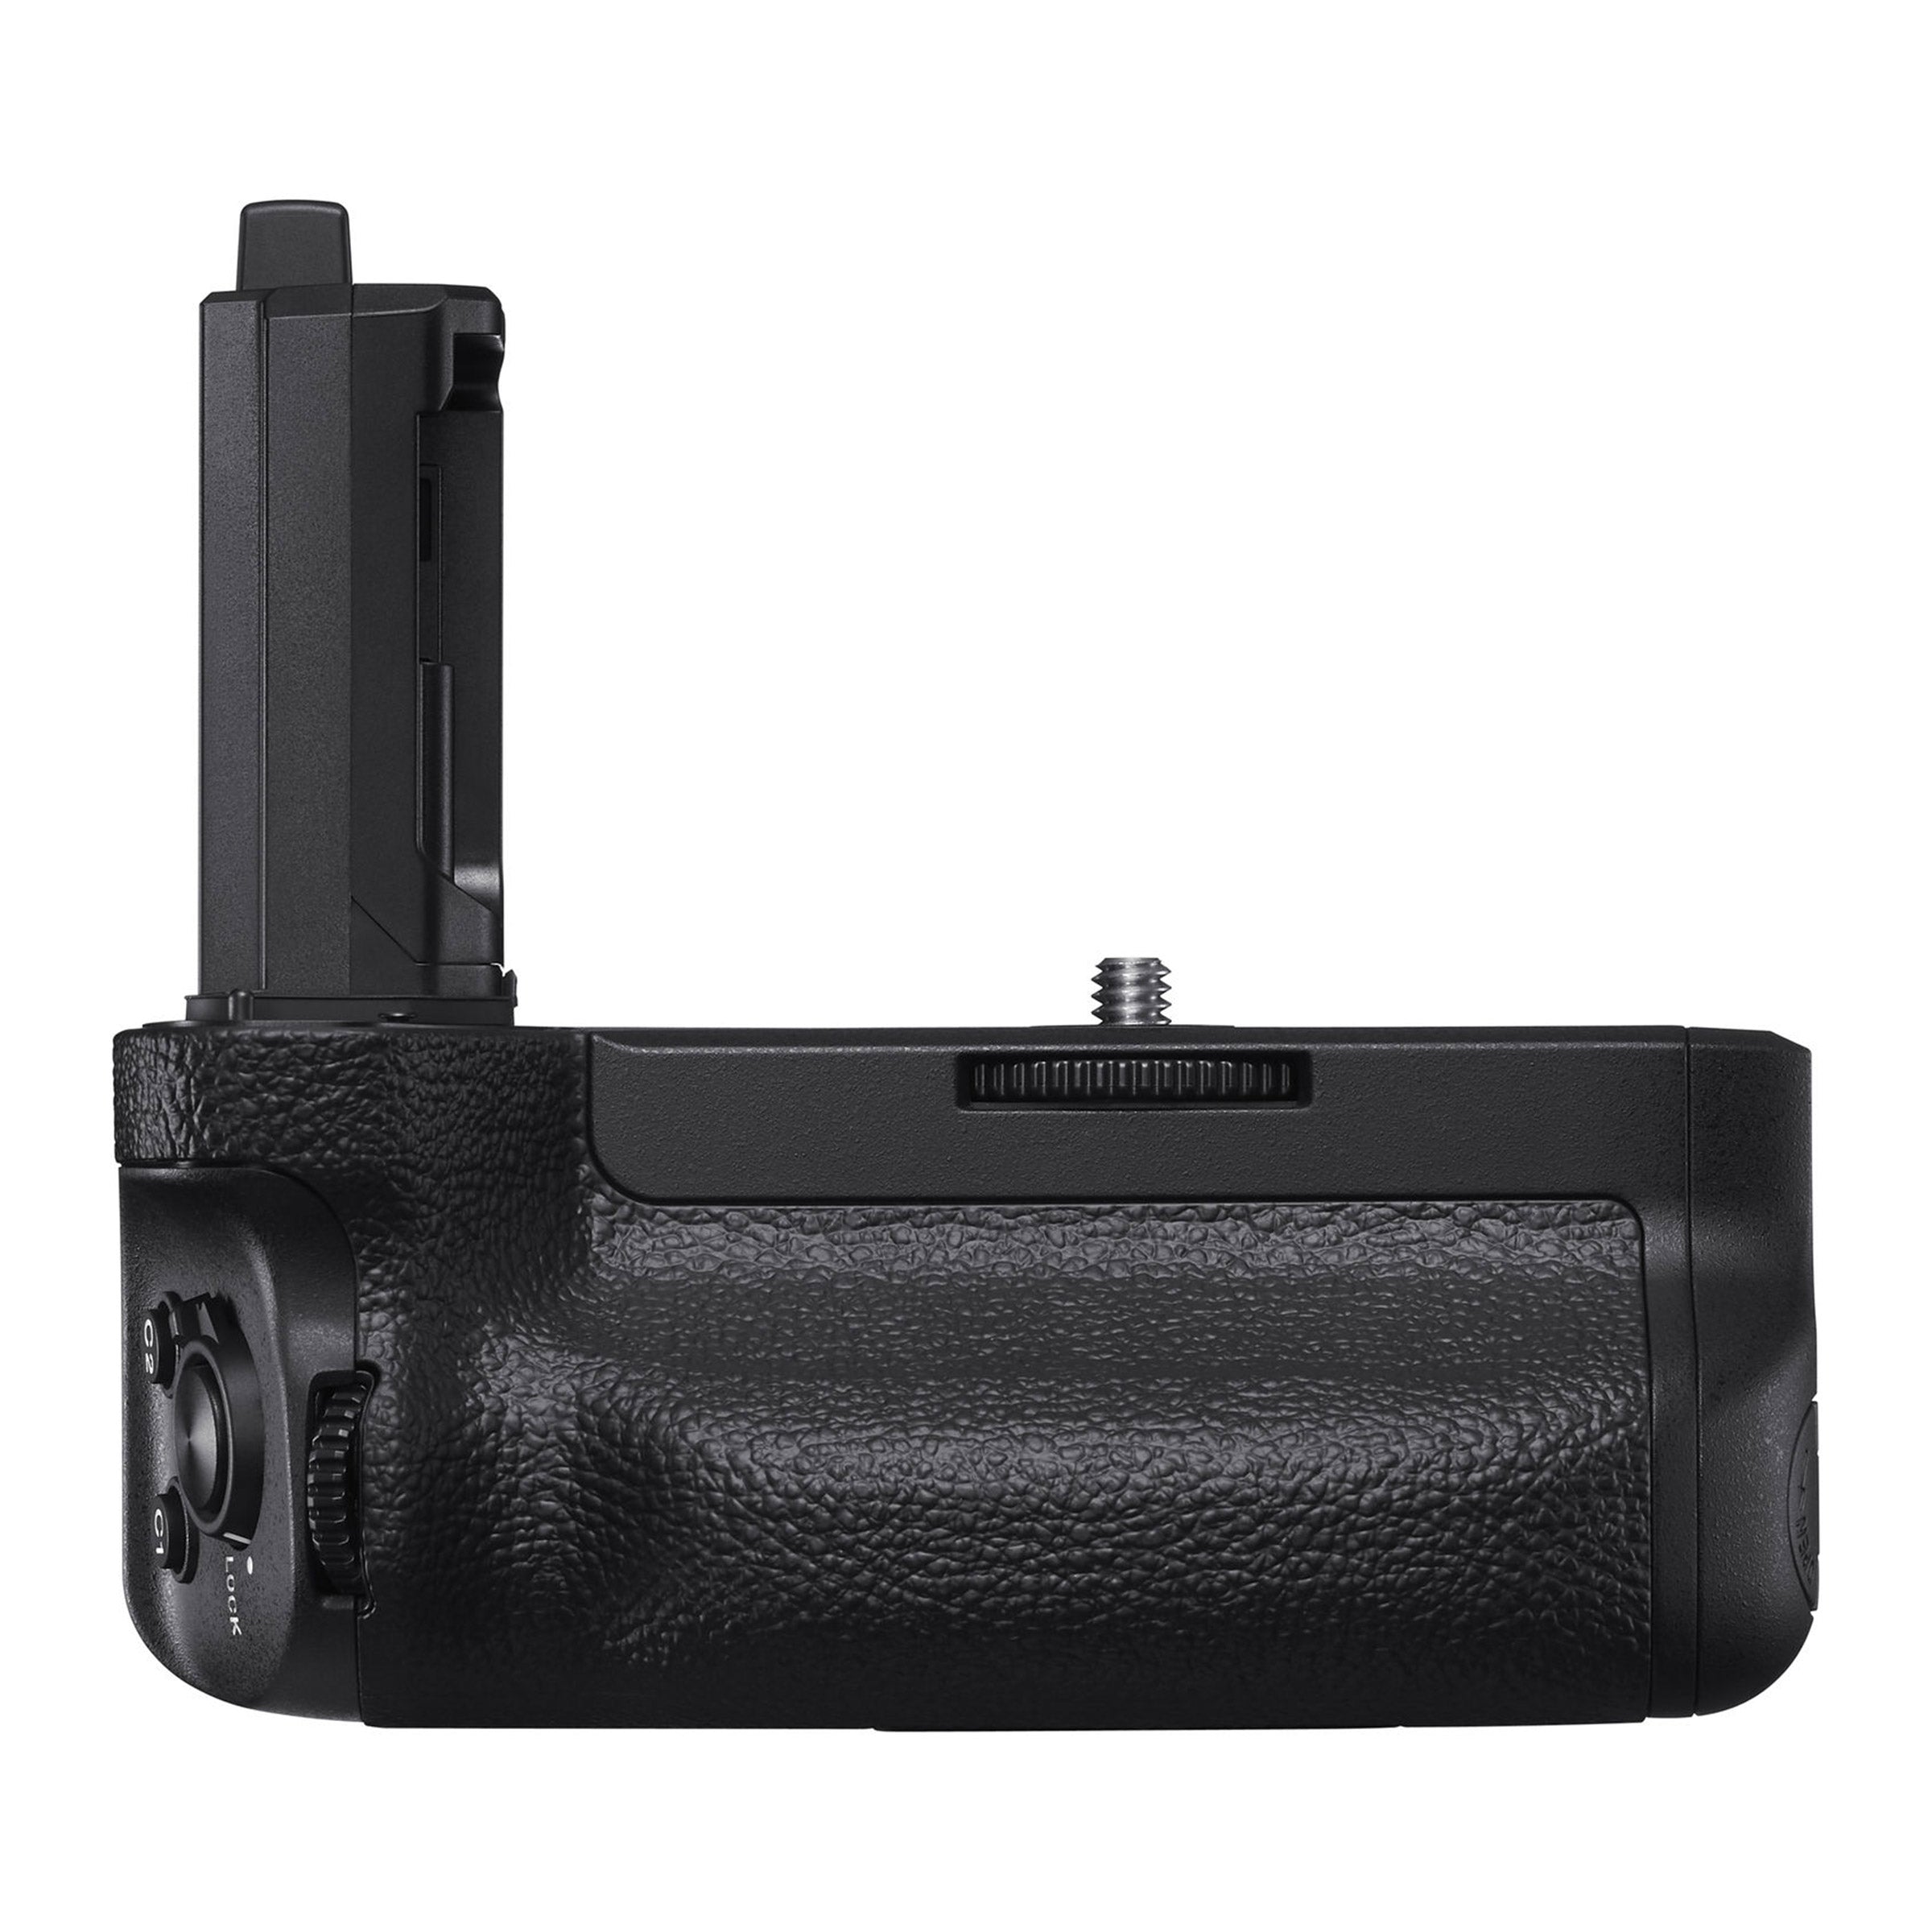 VG-C4EM Vertical Grip for a9 II and a7R IV